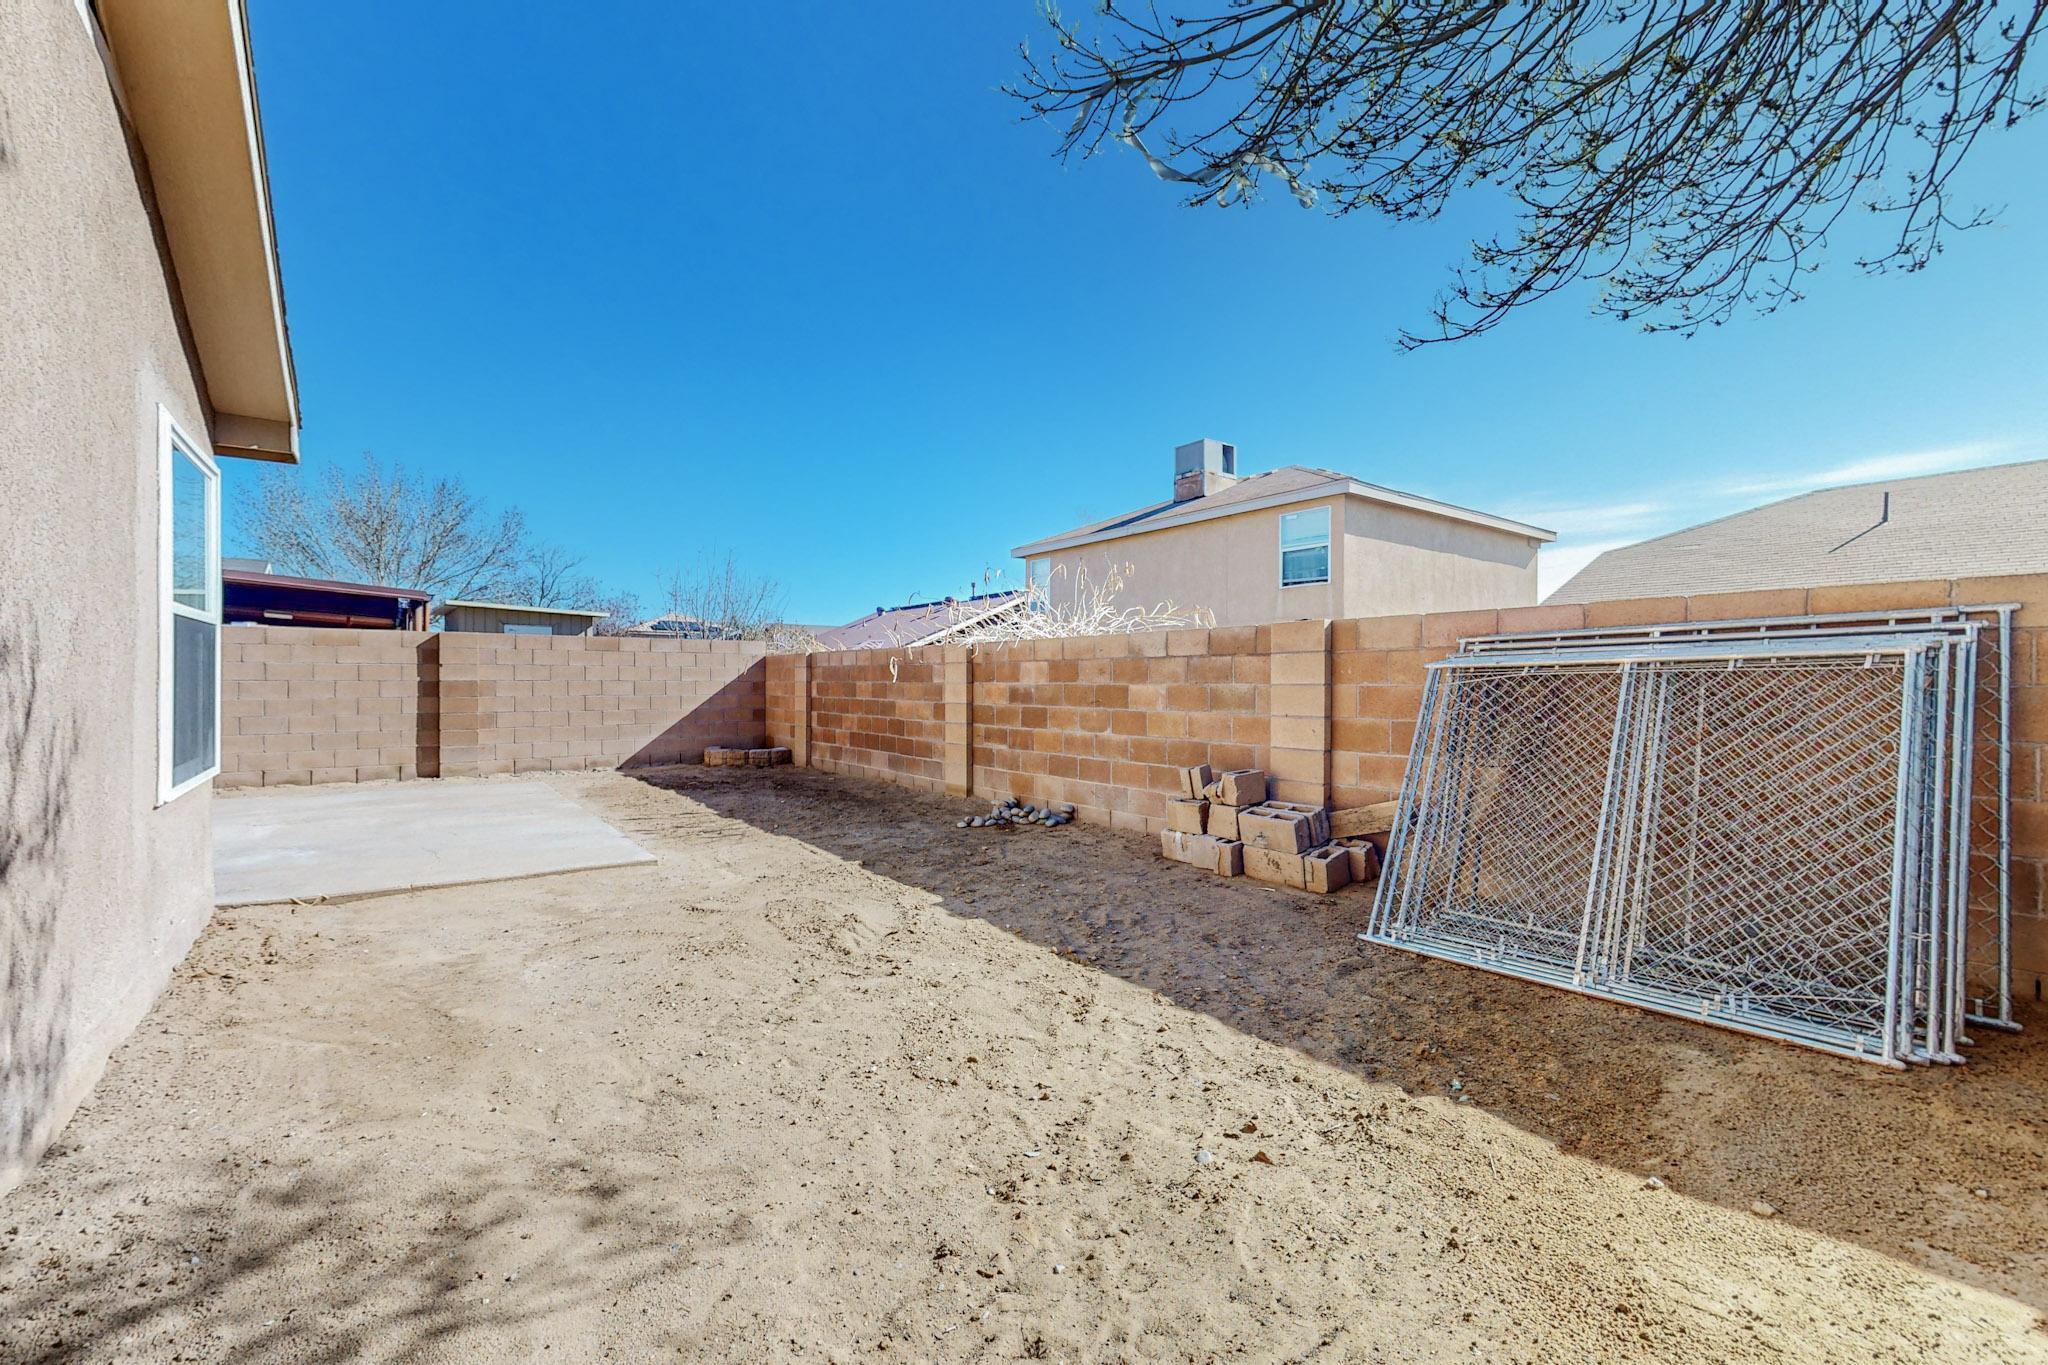 440 Barberry Street SW, Albuquerque, New Mexico 87121, 3 Bedrooms Bedrooms, ,2 BathroomsBathrooms,Residential,For Sale,440 Barberry Street SW,1059215